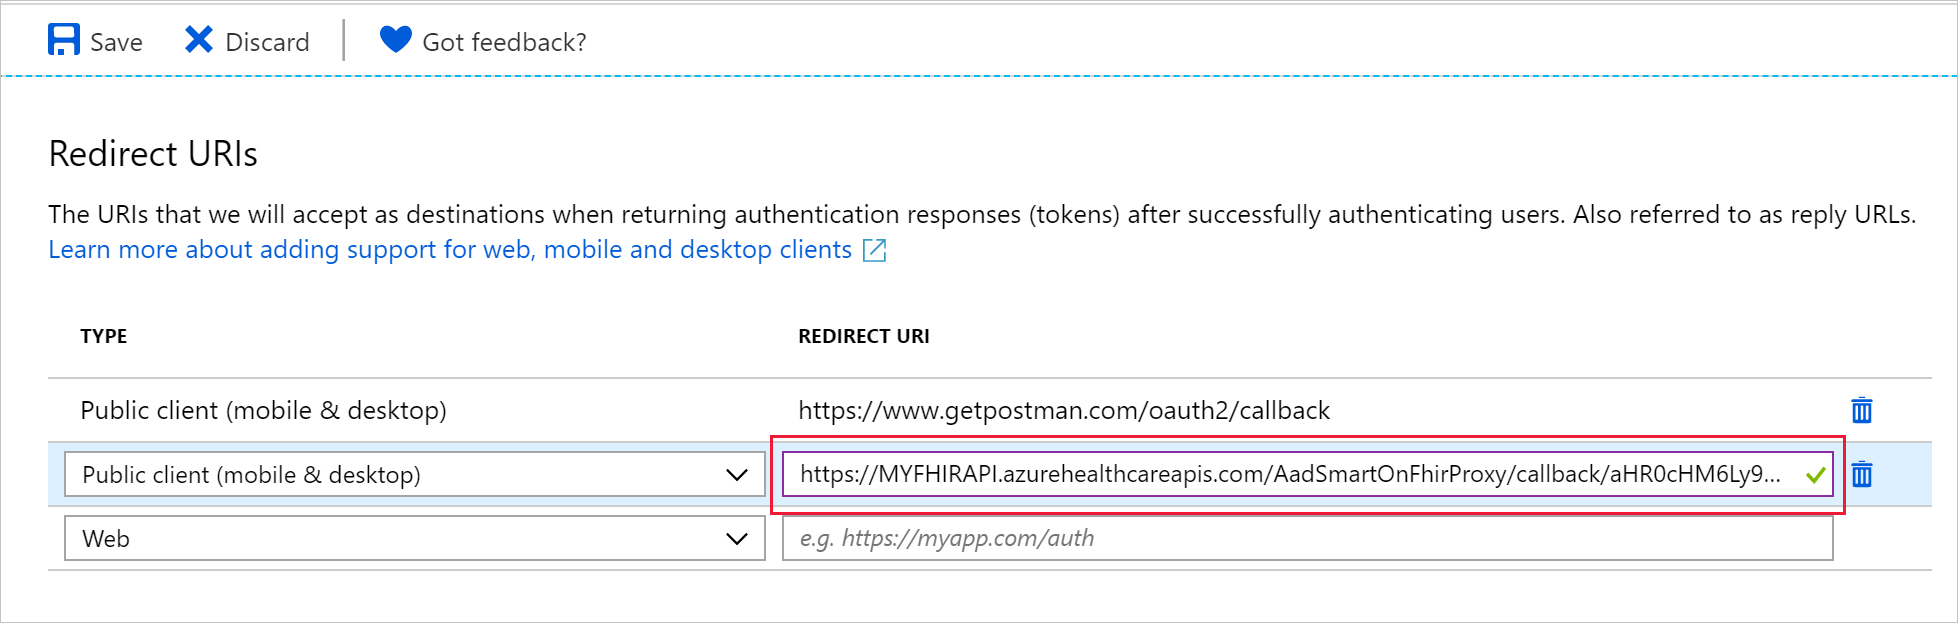 Reply URL configured for the public client